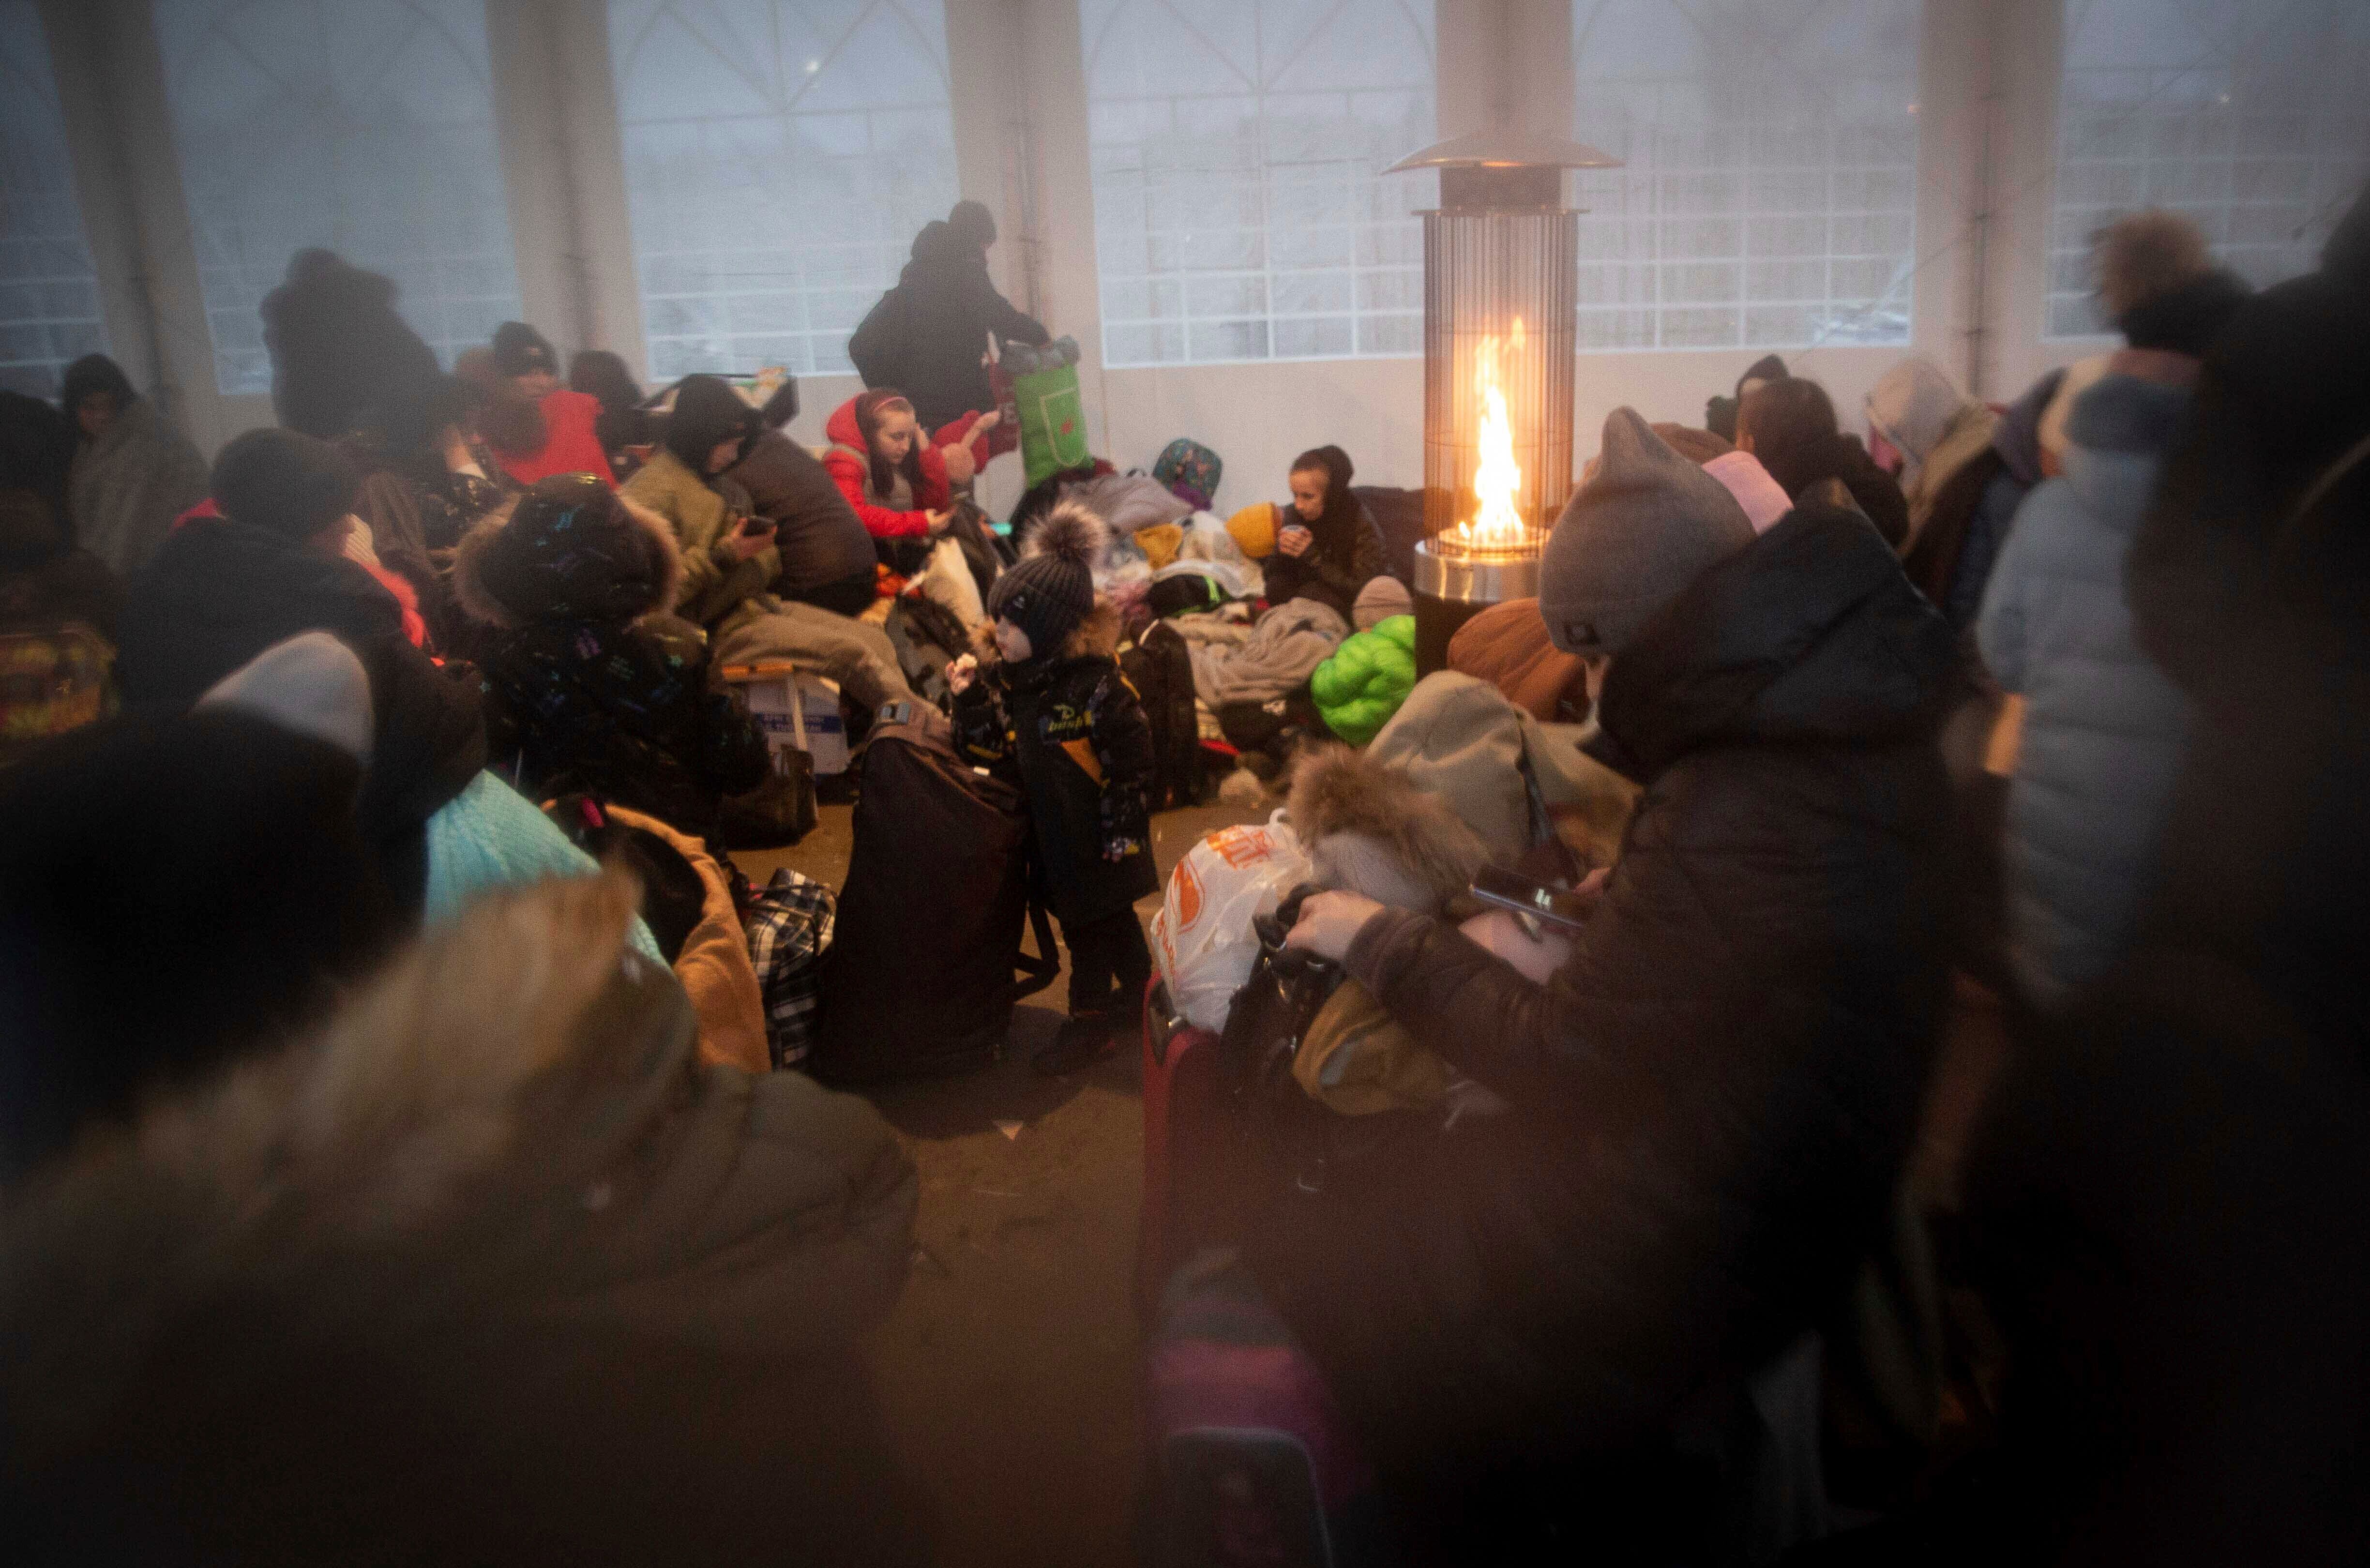 Refugees, mostly women with children, rest inside a tent after arriving at the border crossing, in Medyka, Poland on Sunday, March 6, 2022. (Visar Kryeziu/AP)